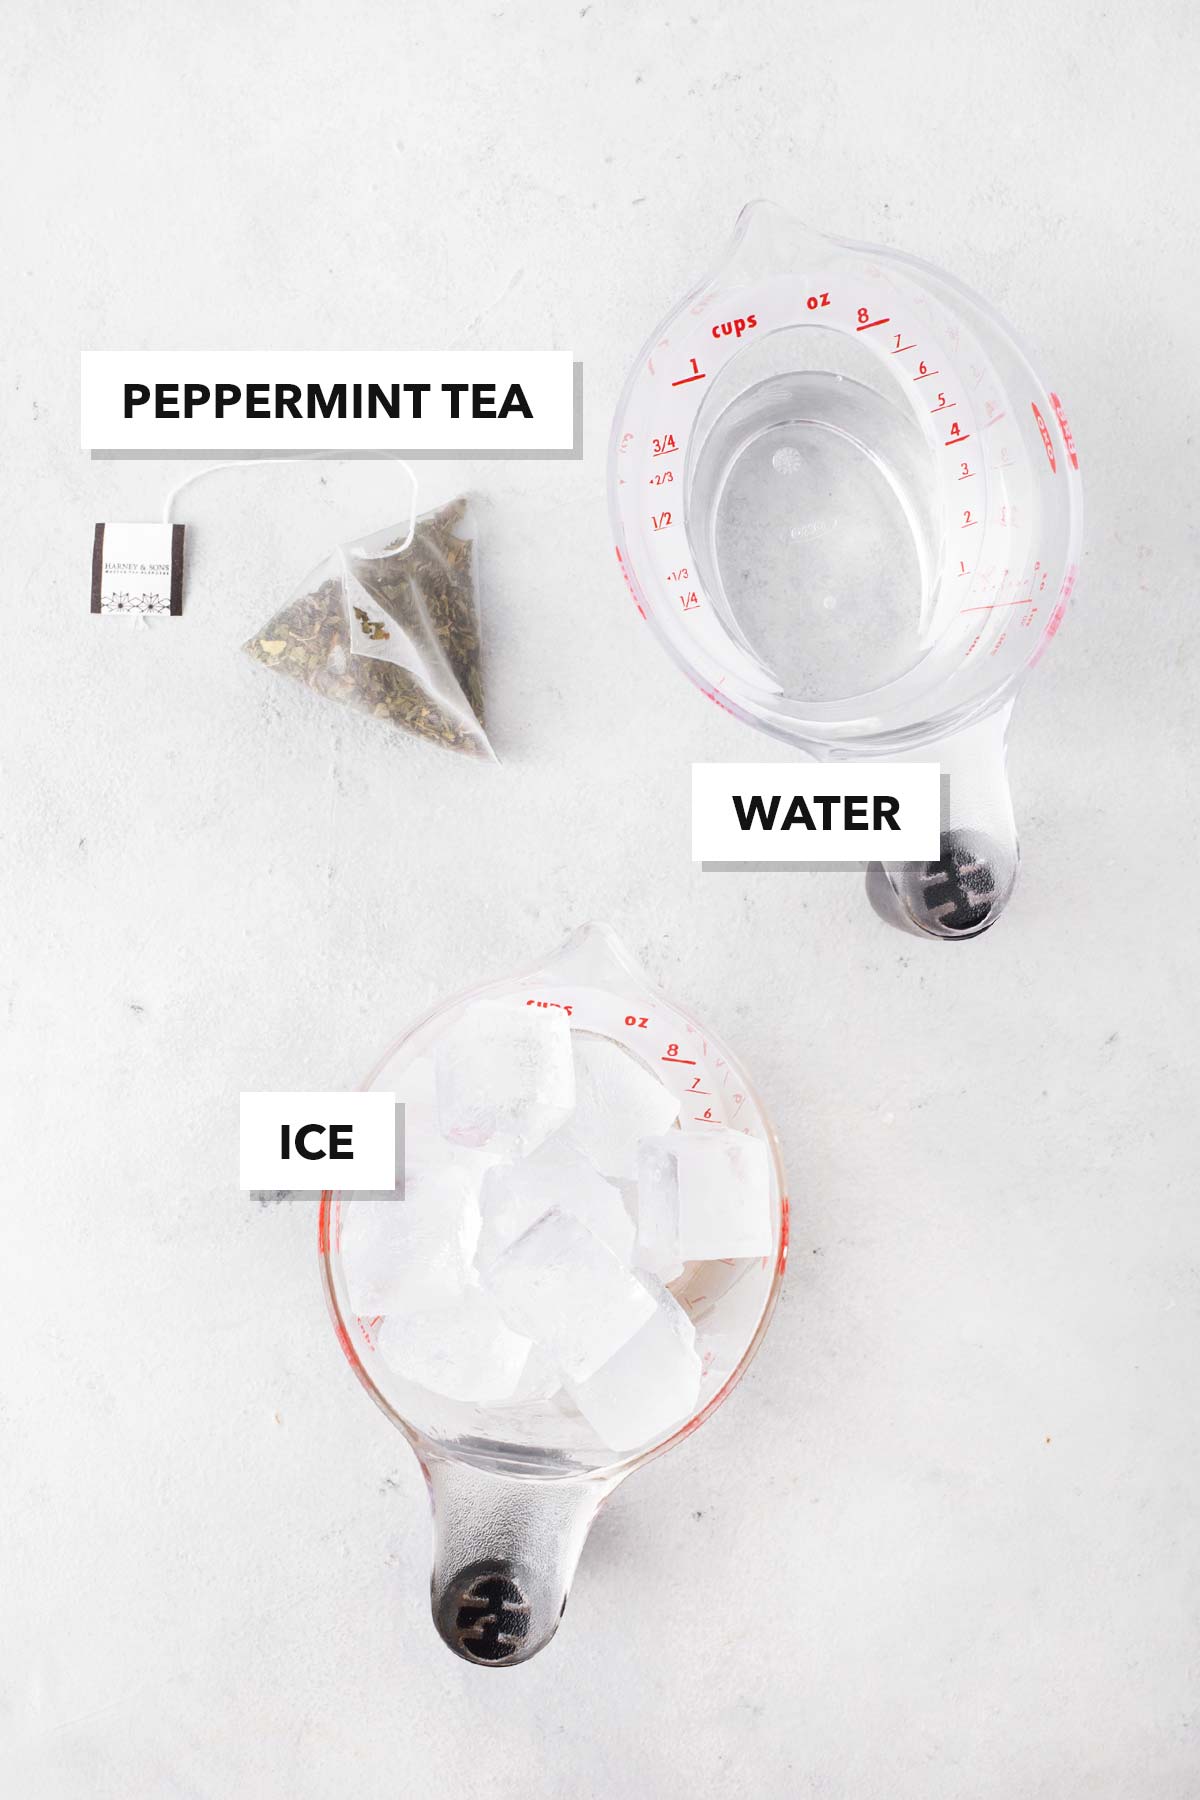 Ingredients for Mint Iced Tea measured out in bowls and cups.